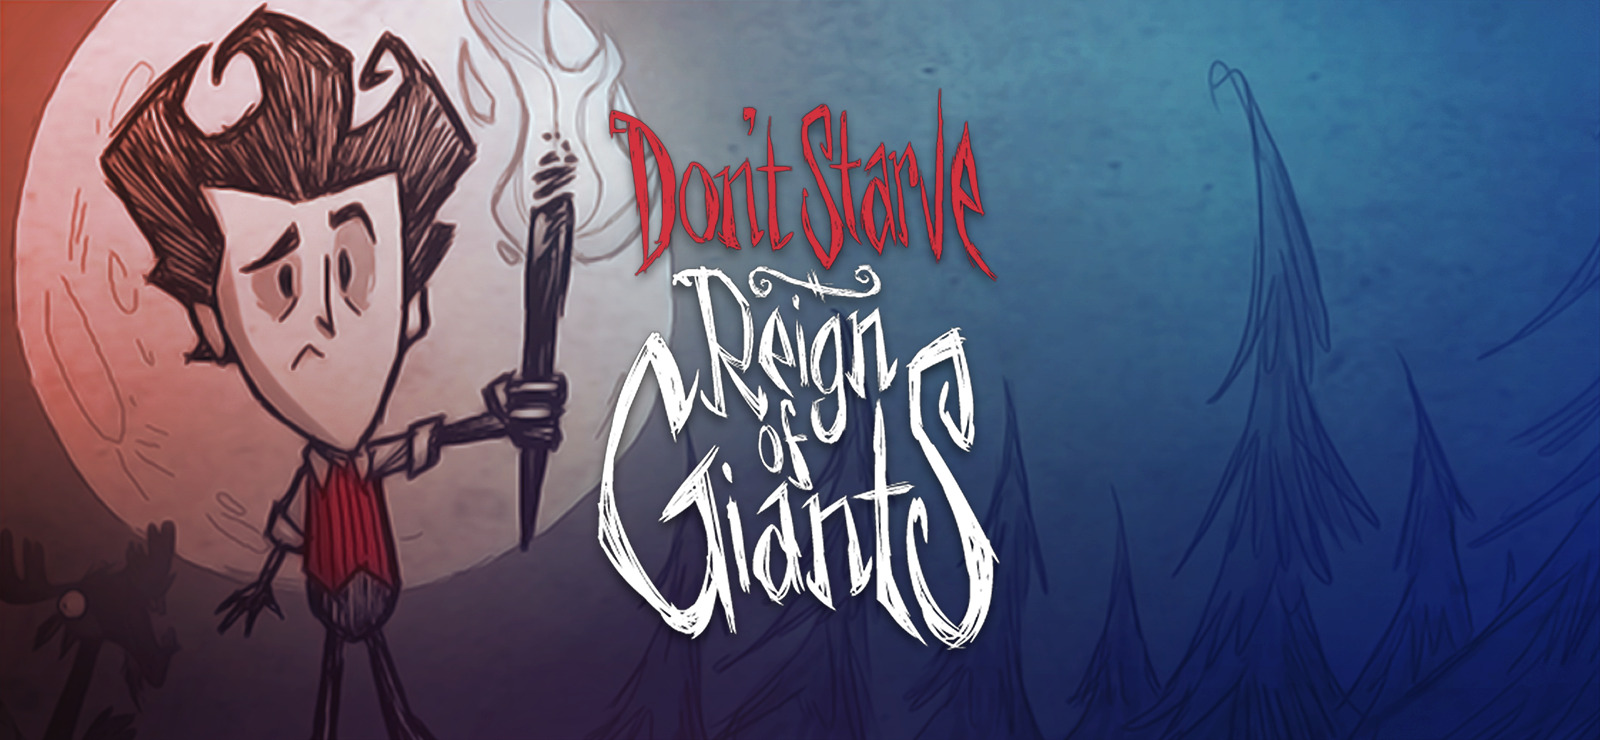 My wallpaper for Wigfrid - [Don't Starve Together] General Discussion -  Klei Entertainment Forums